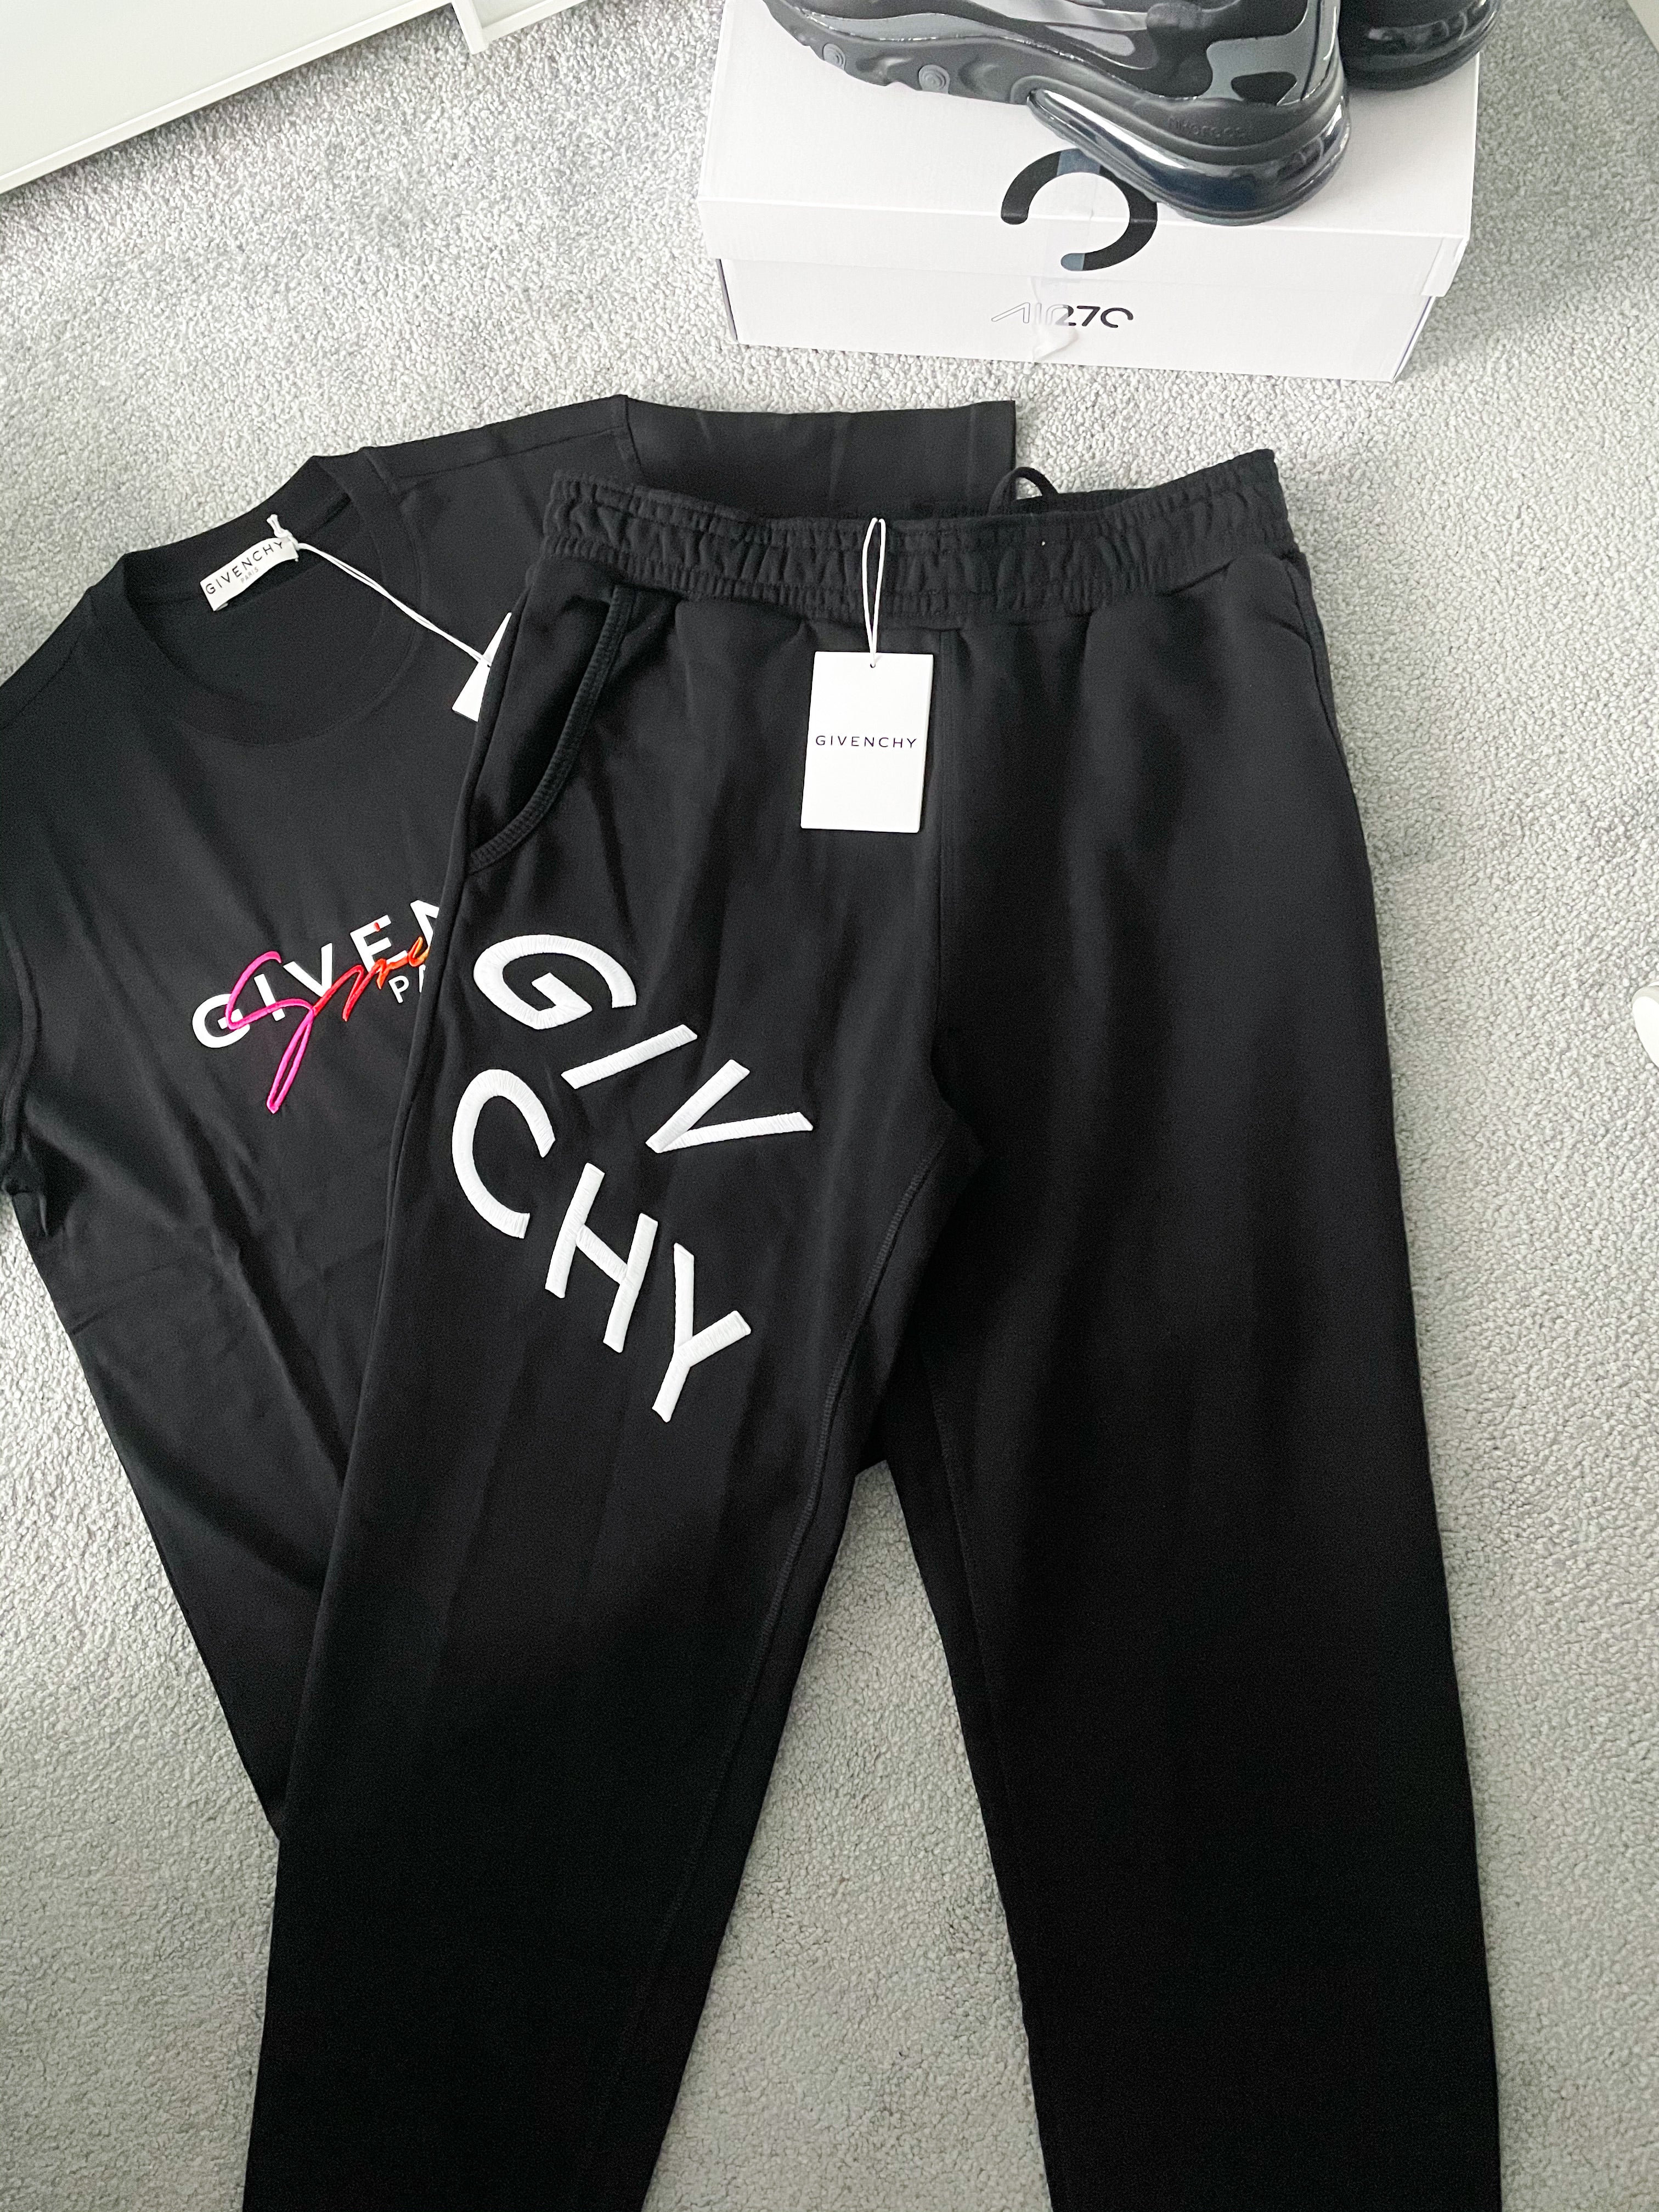 Givenchy Refracted Logo Sweatpants